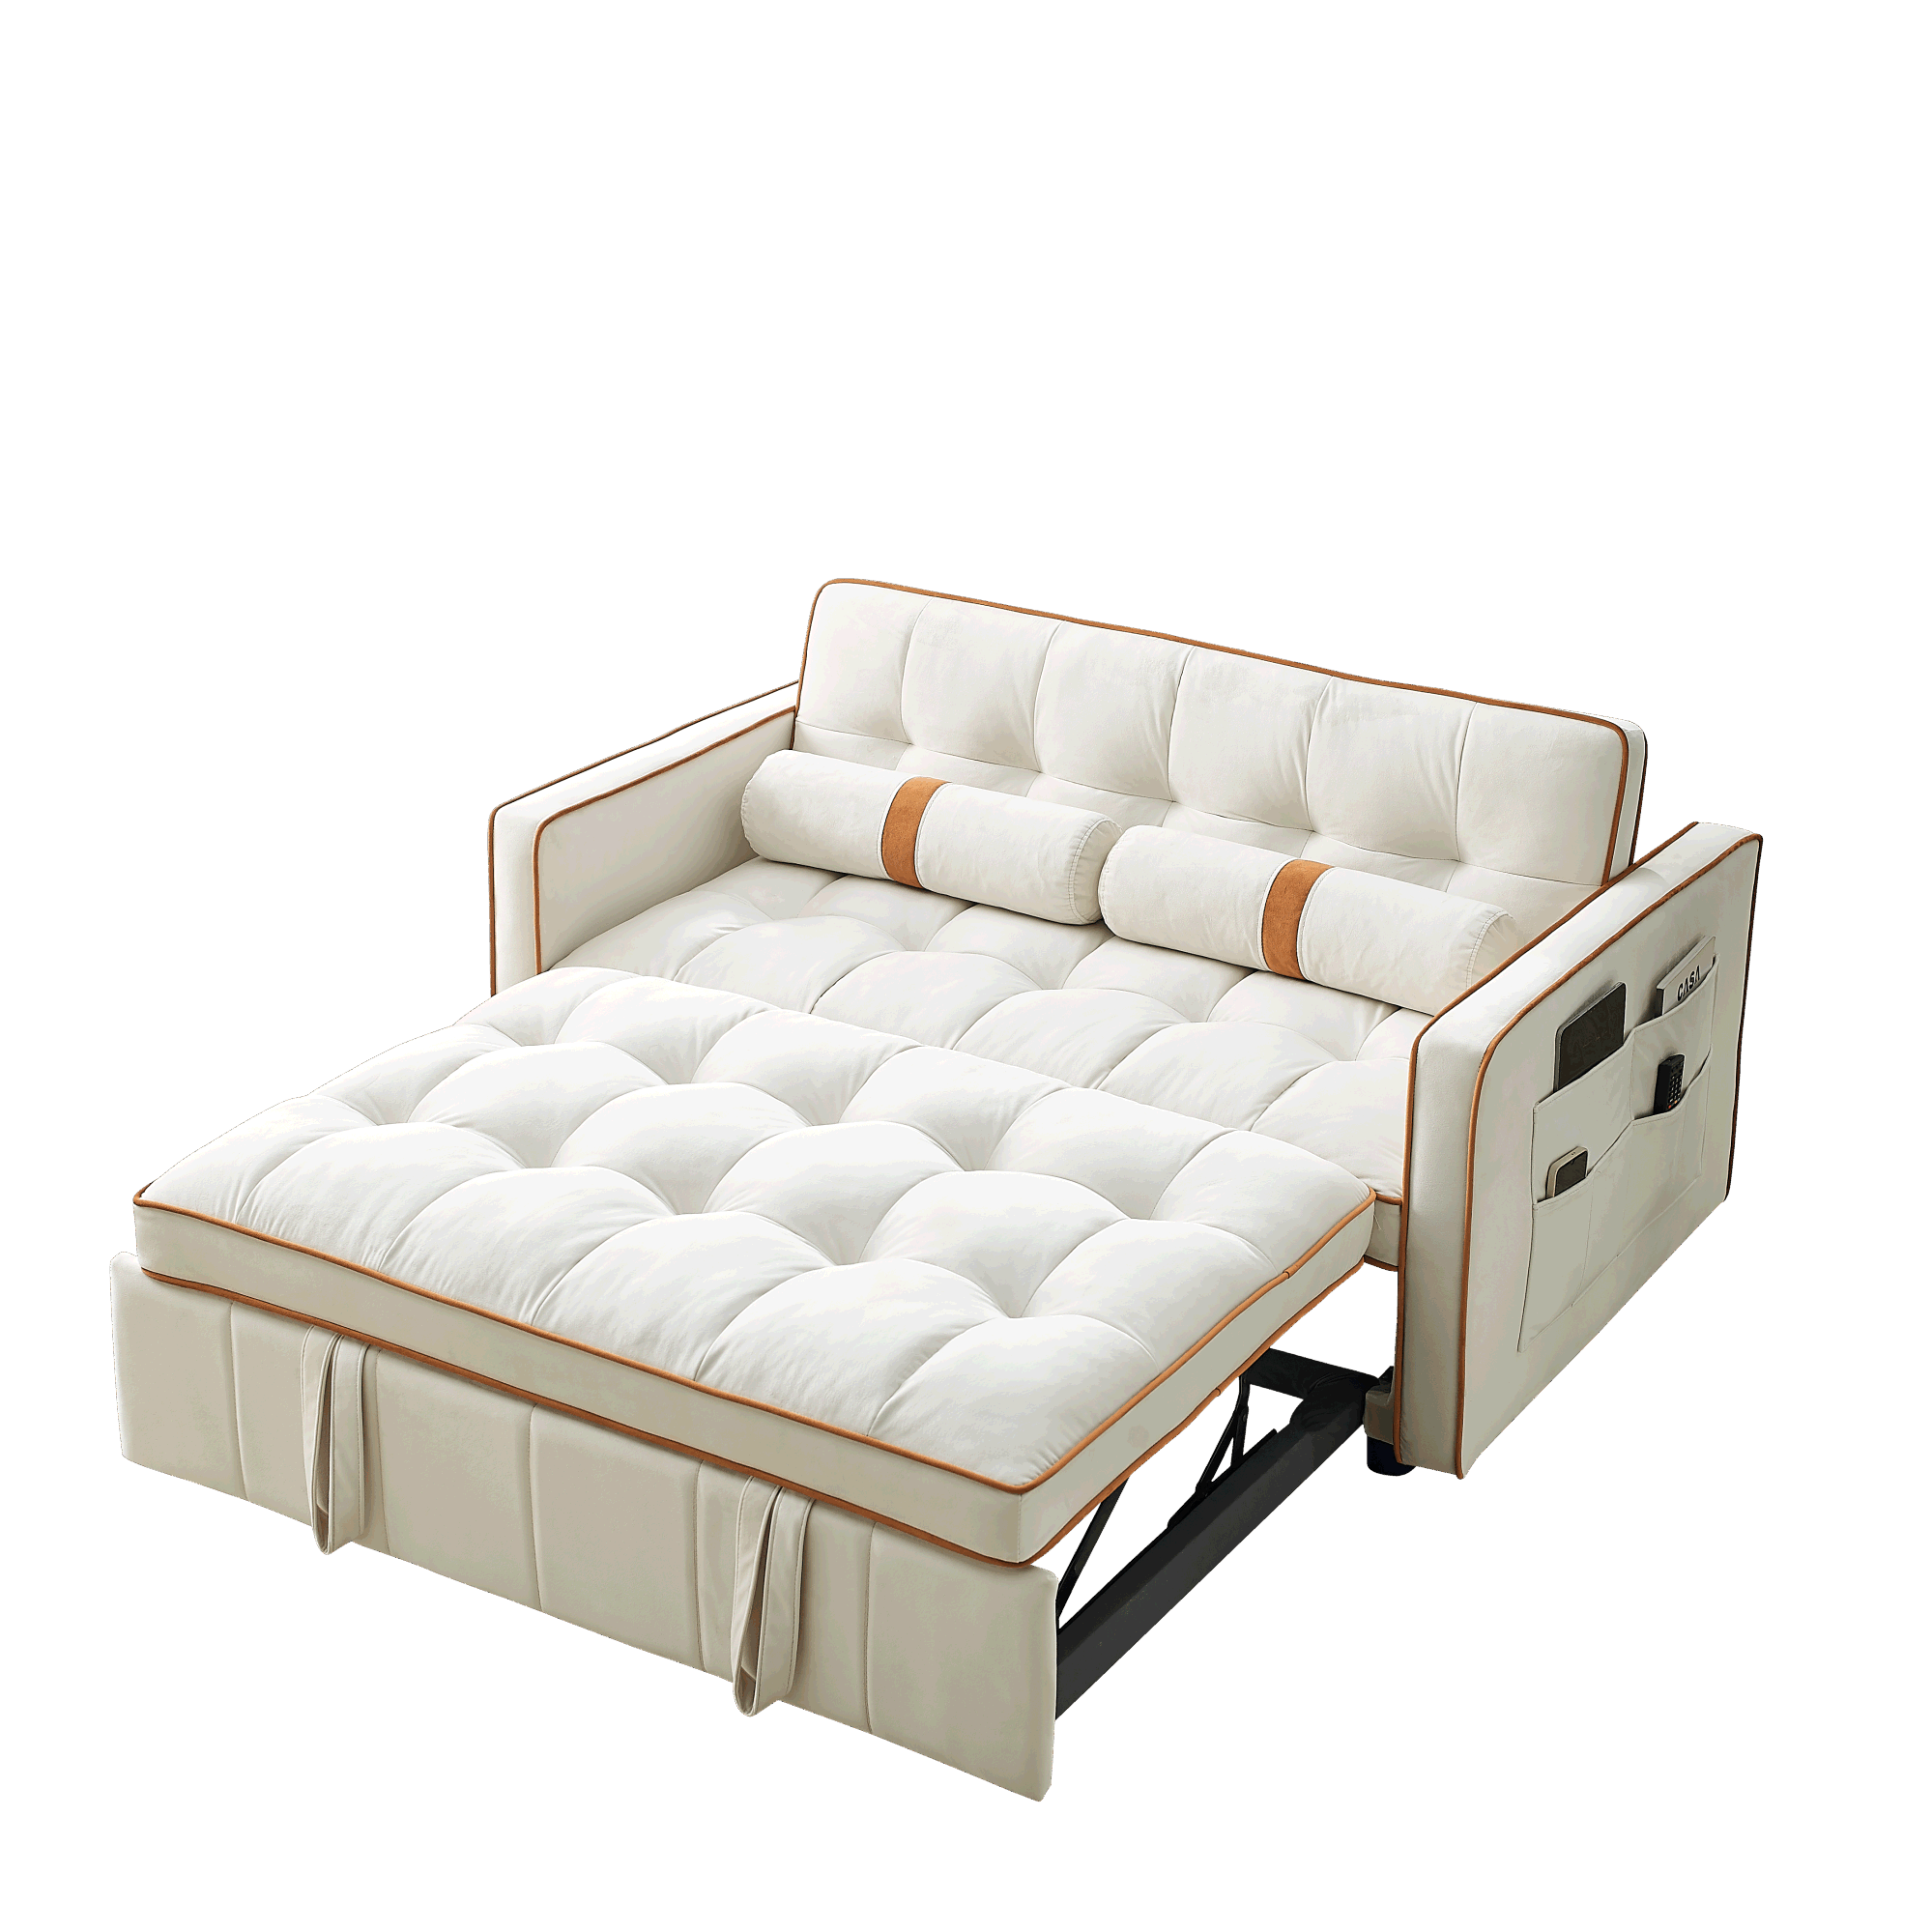 Modern 55.5 Pull Out Sleep Sofa Bed 2 Seater Loveseats Couch with side pockets,